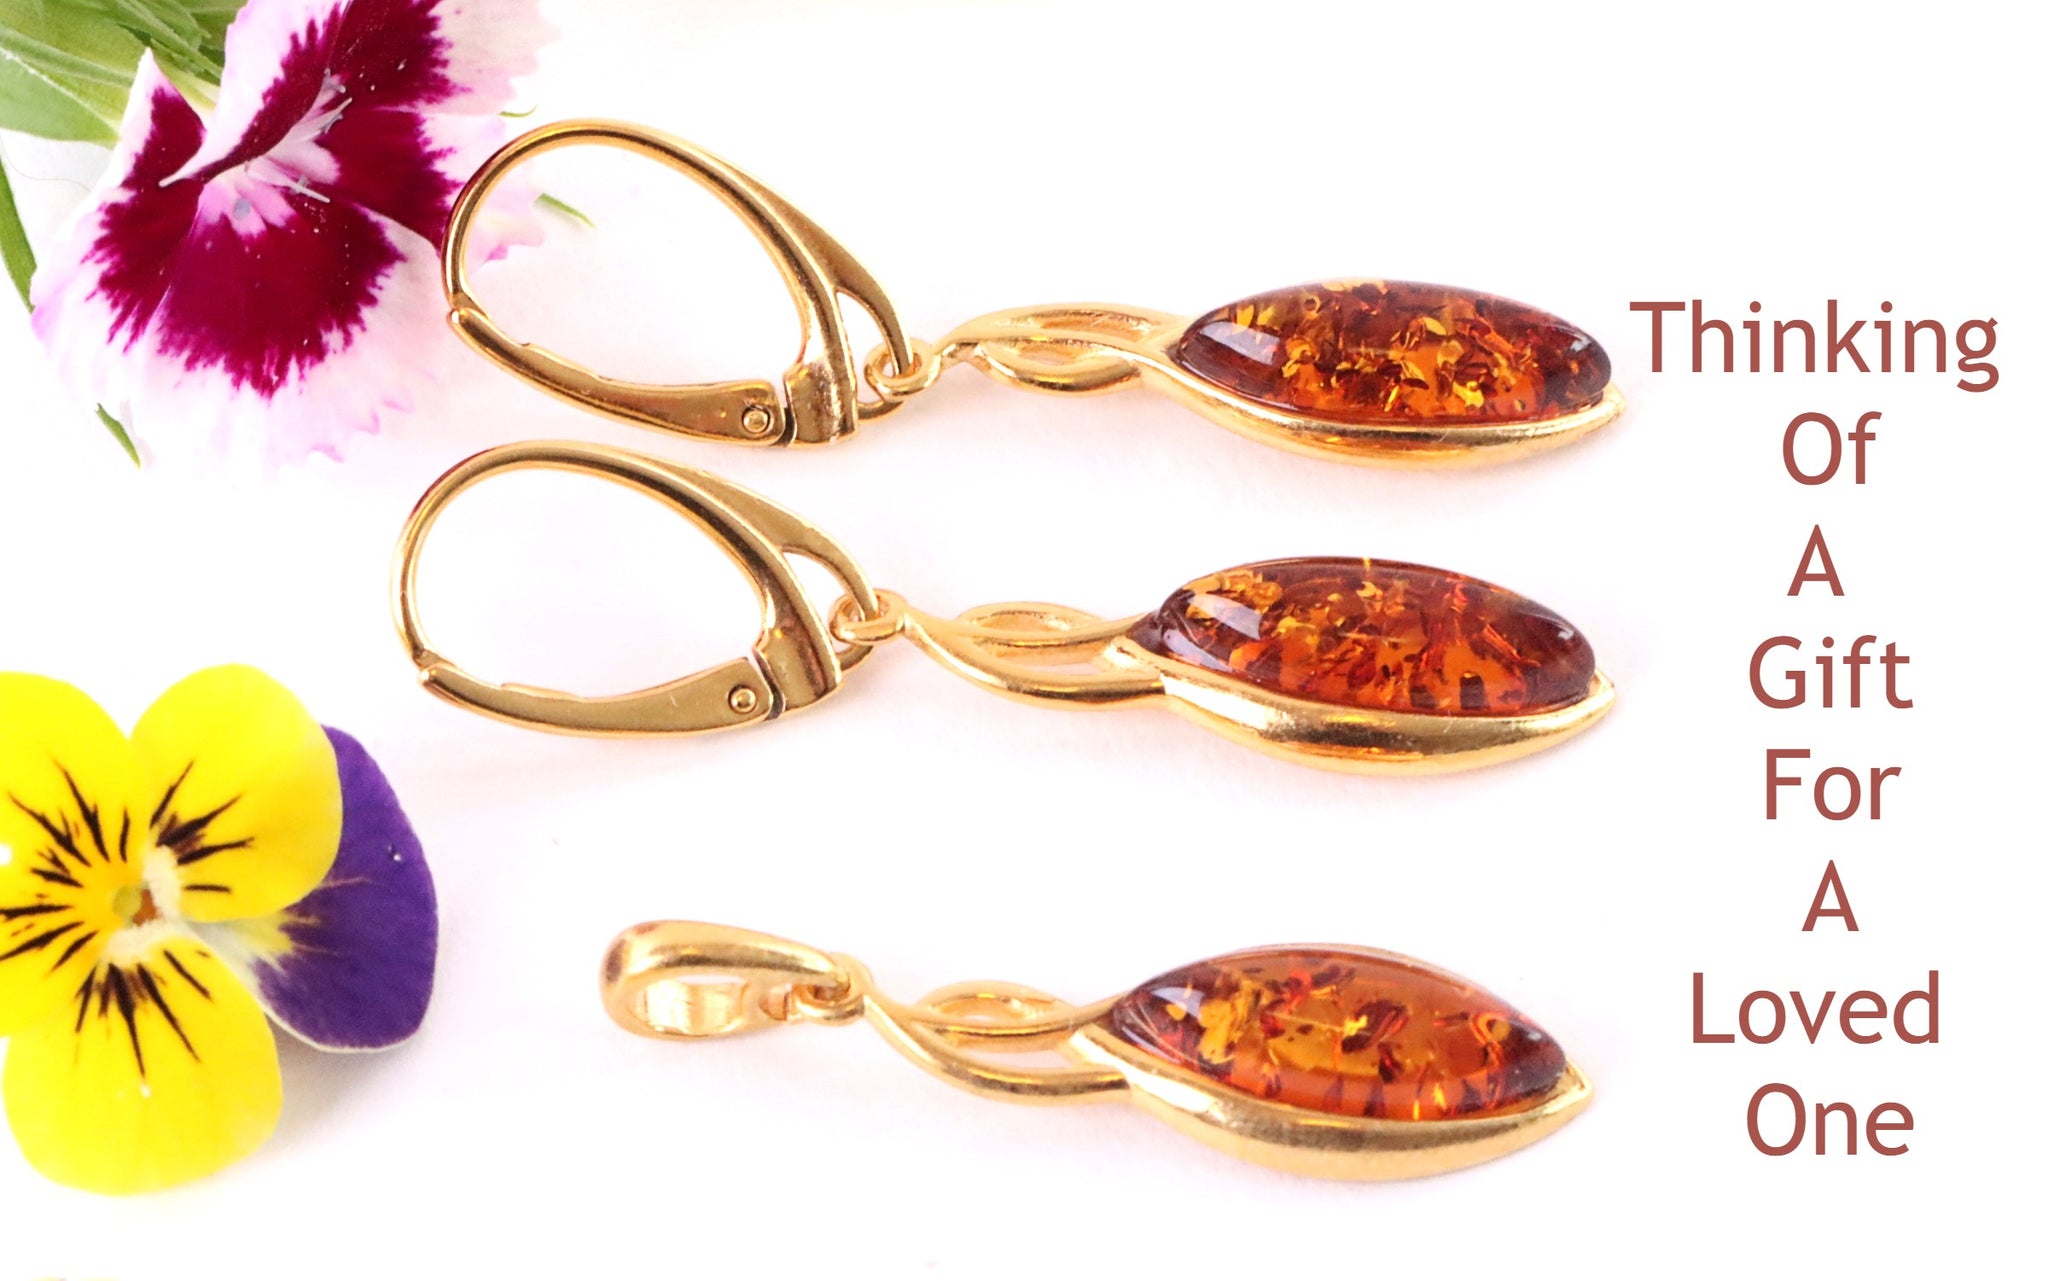 925 Gold Plated Earrings and Pendant Set